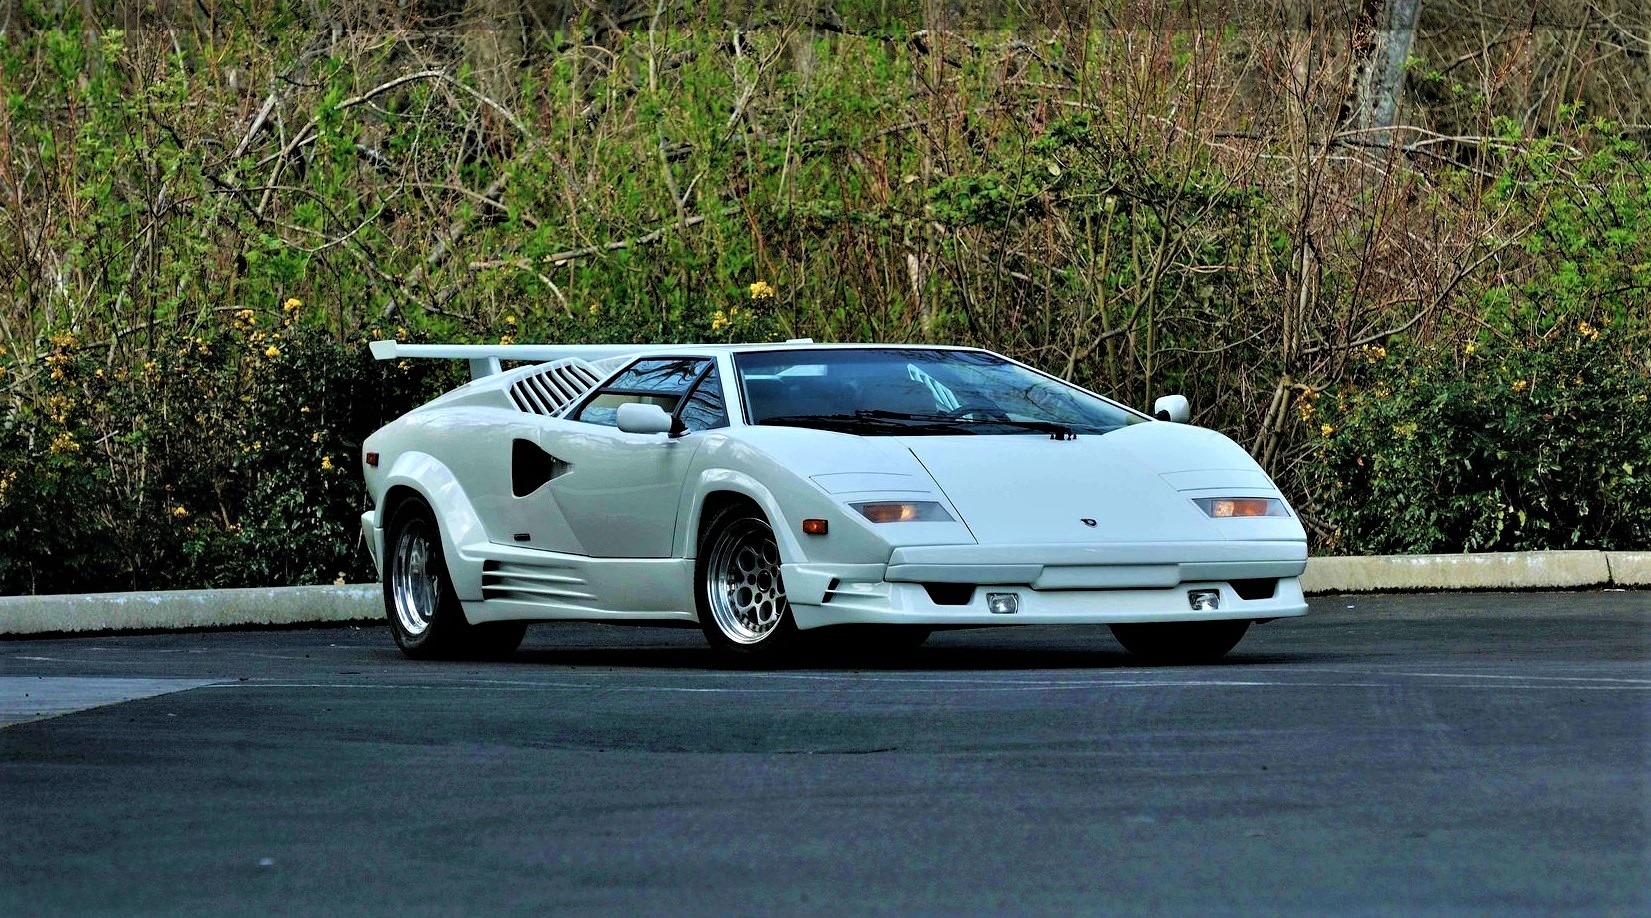 Used 1989 Lamborghini Countach LP112D for sale Sold at The Gables Sports Cars in Miami FL 33146 4